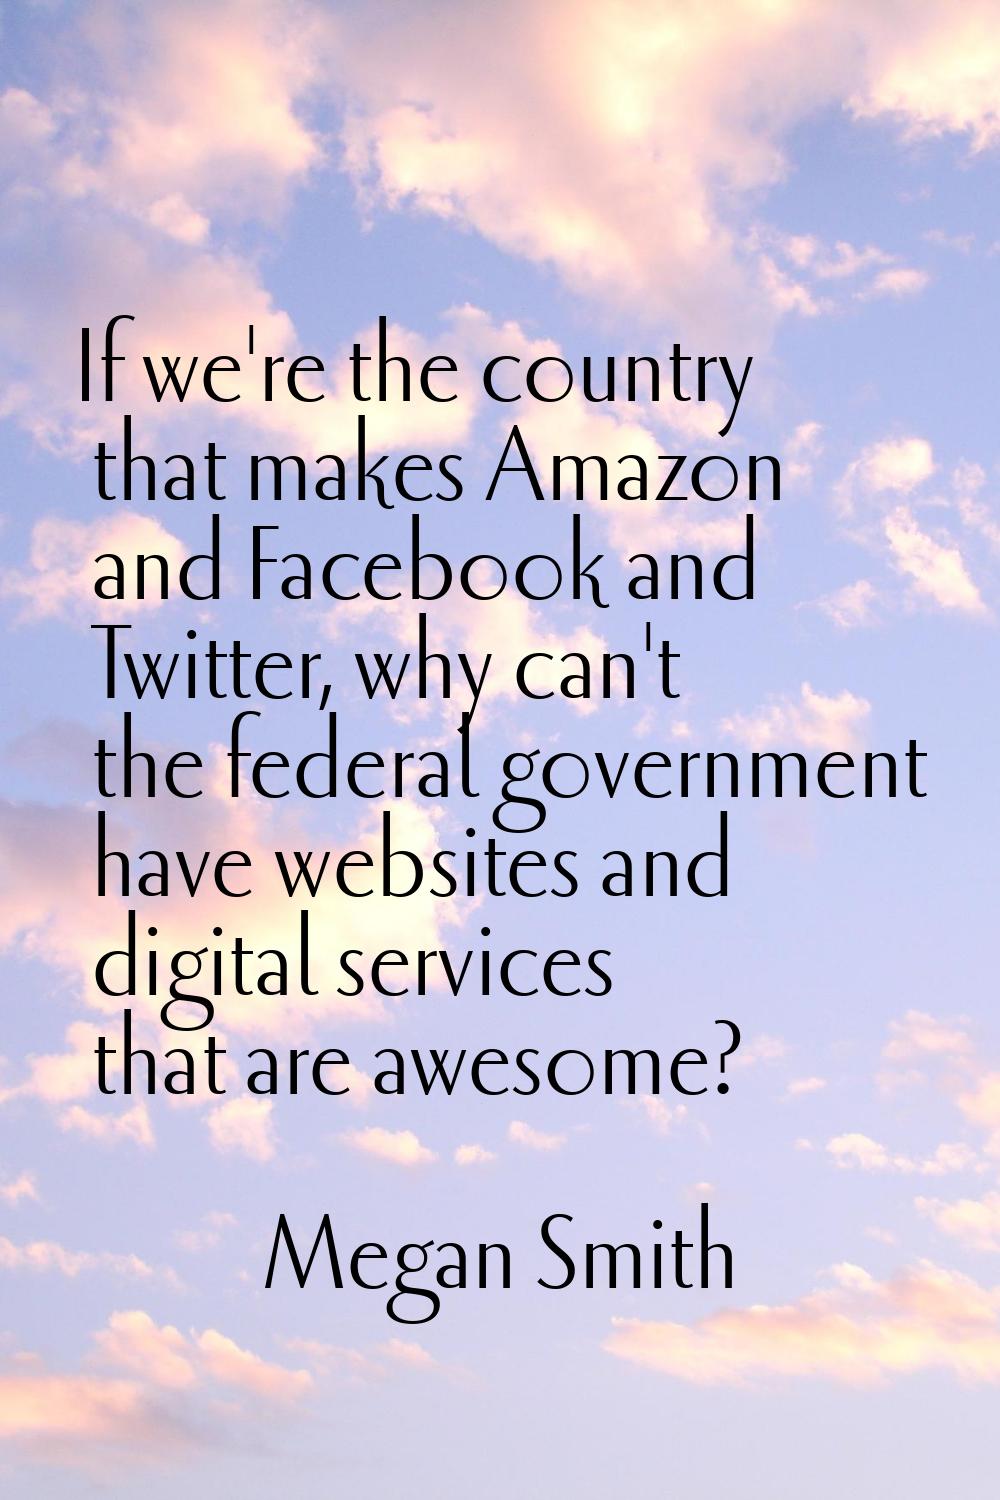 If we're the country that makes Amazon and Facebook and Twitter, why can't the federal government h